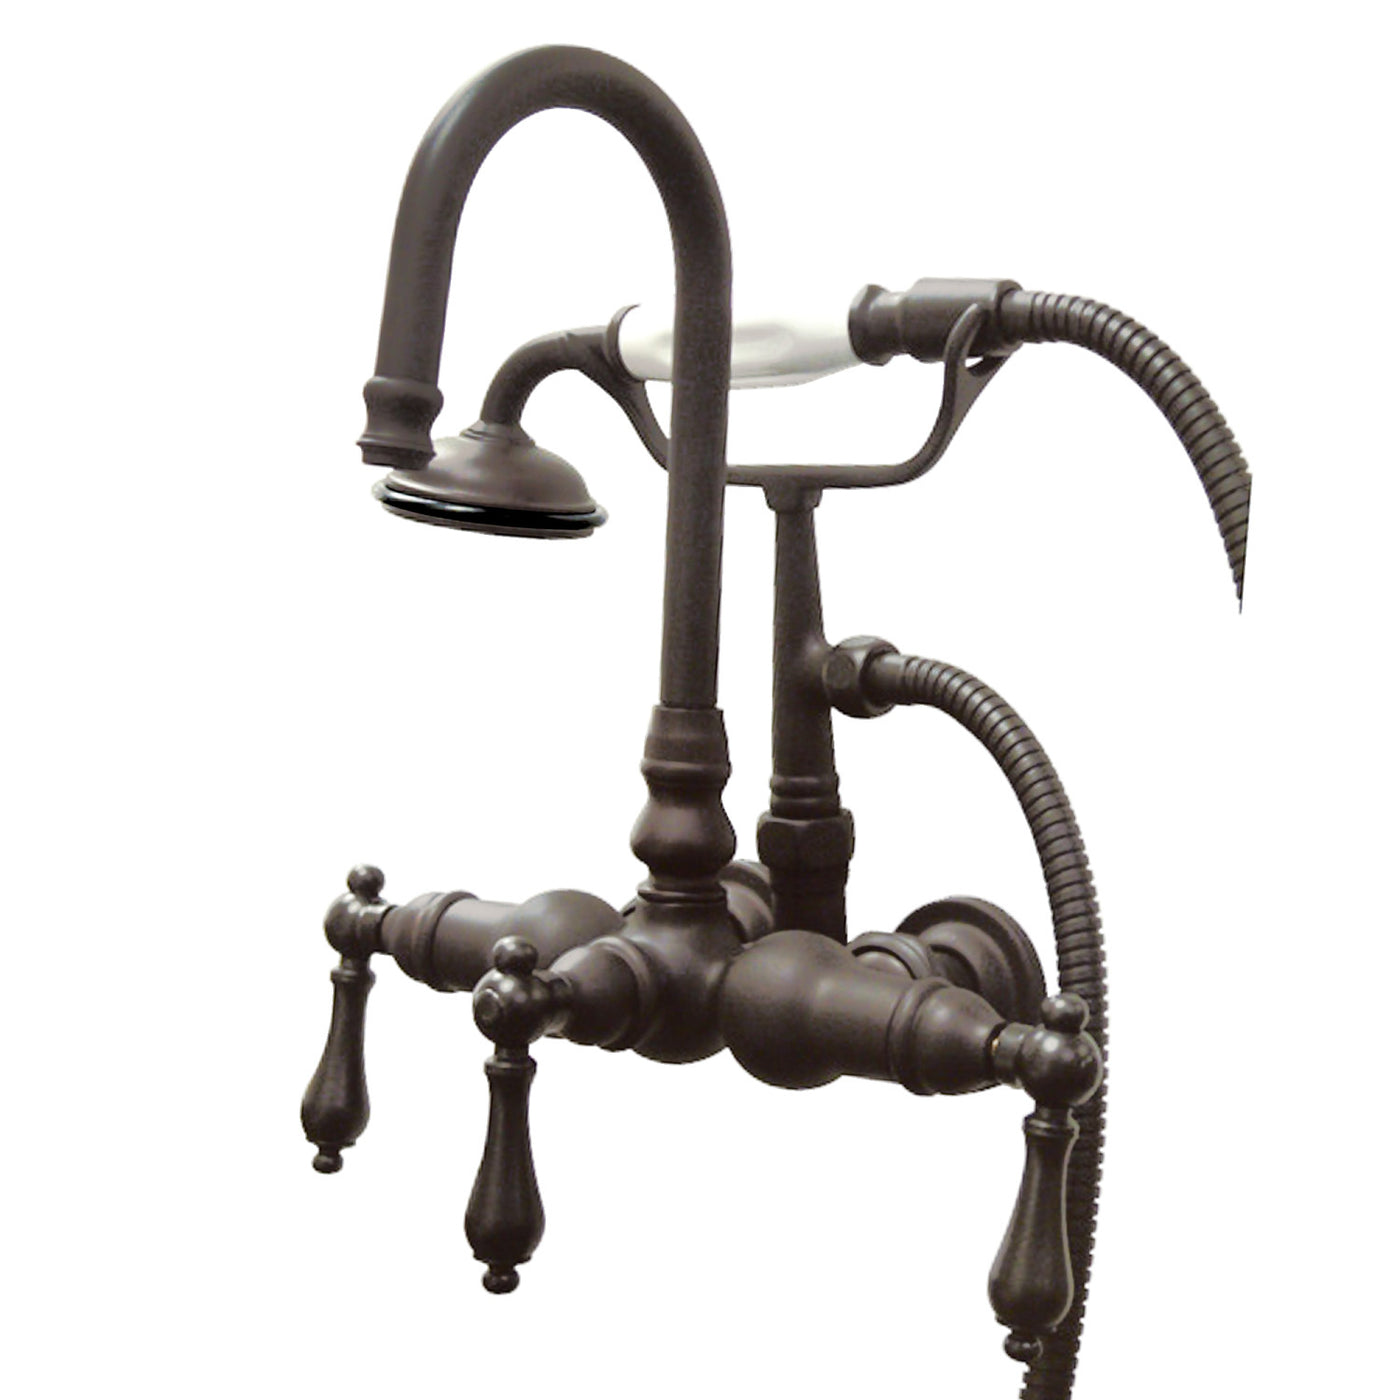 Elements of Design DT0075AL 3-3/8" Wall Mount Tub Faucet with Hand Shower, Oil Rubbed Bronze